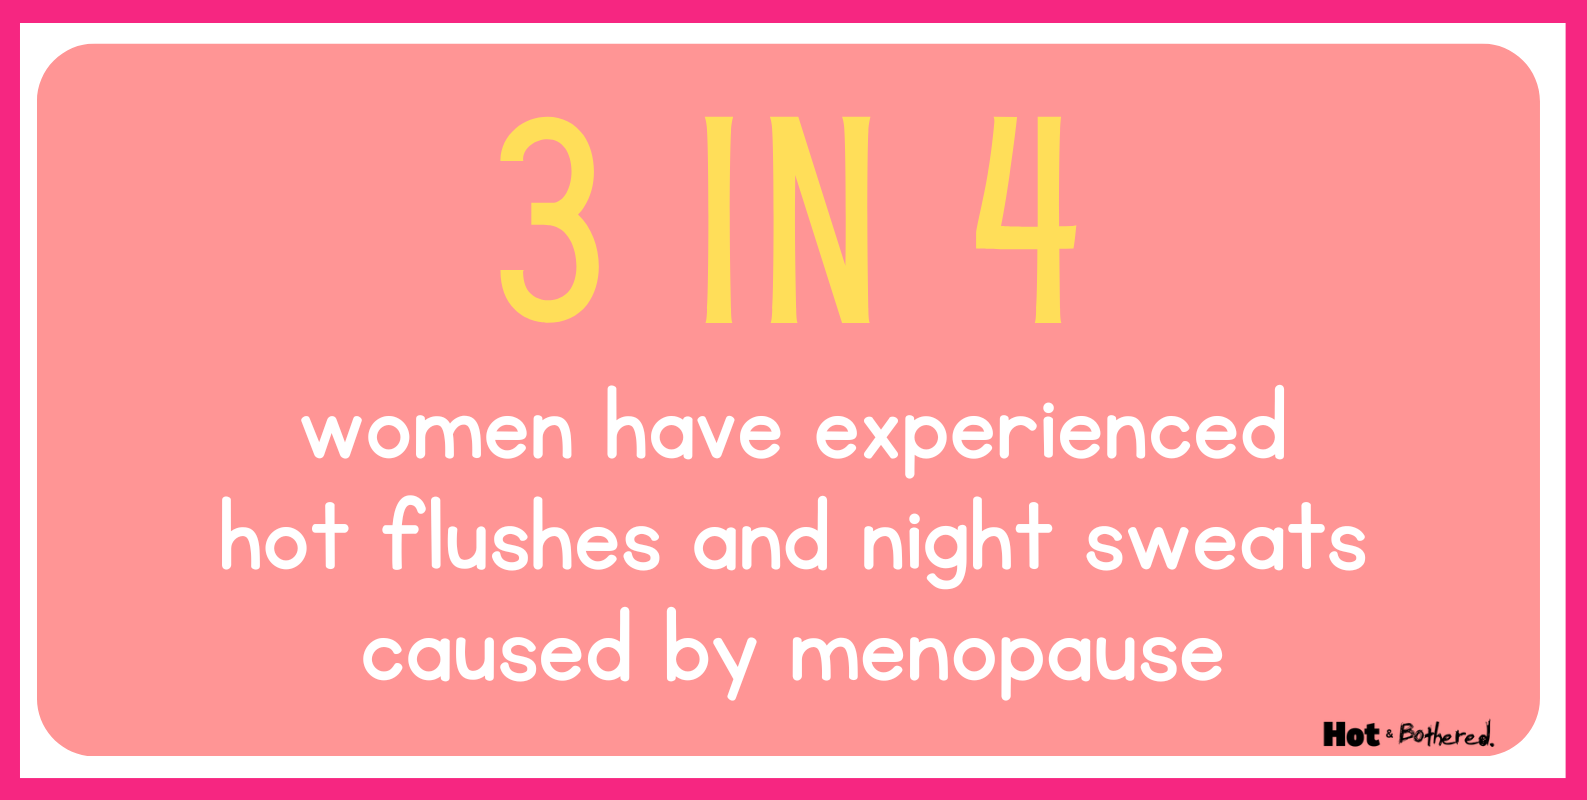 Flushes and night sweats caused by menopause